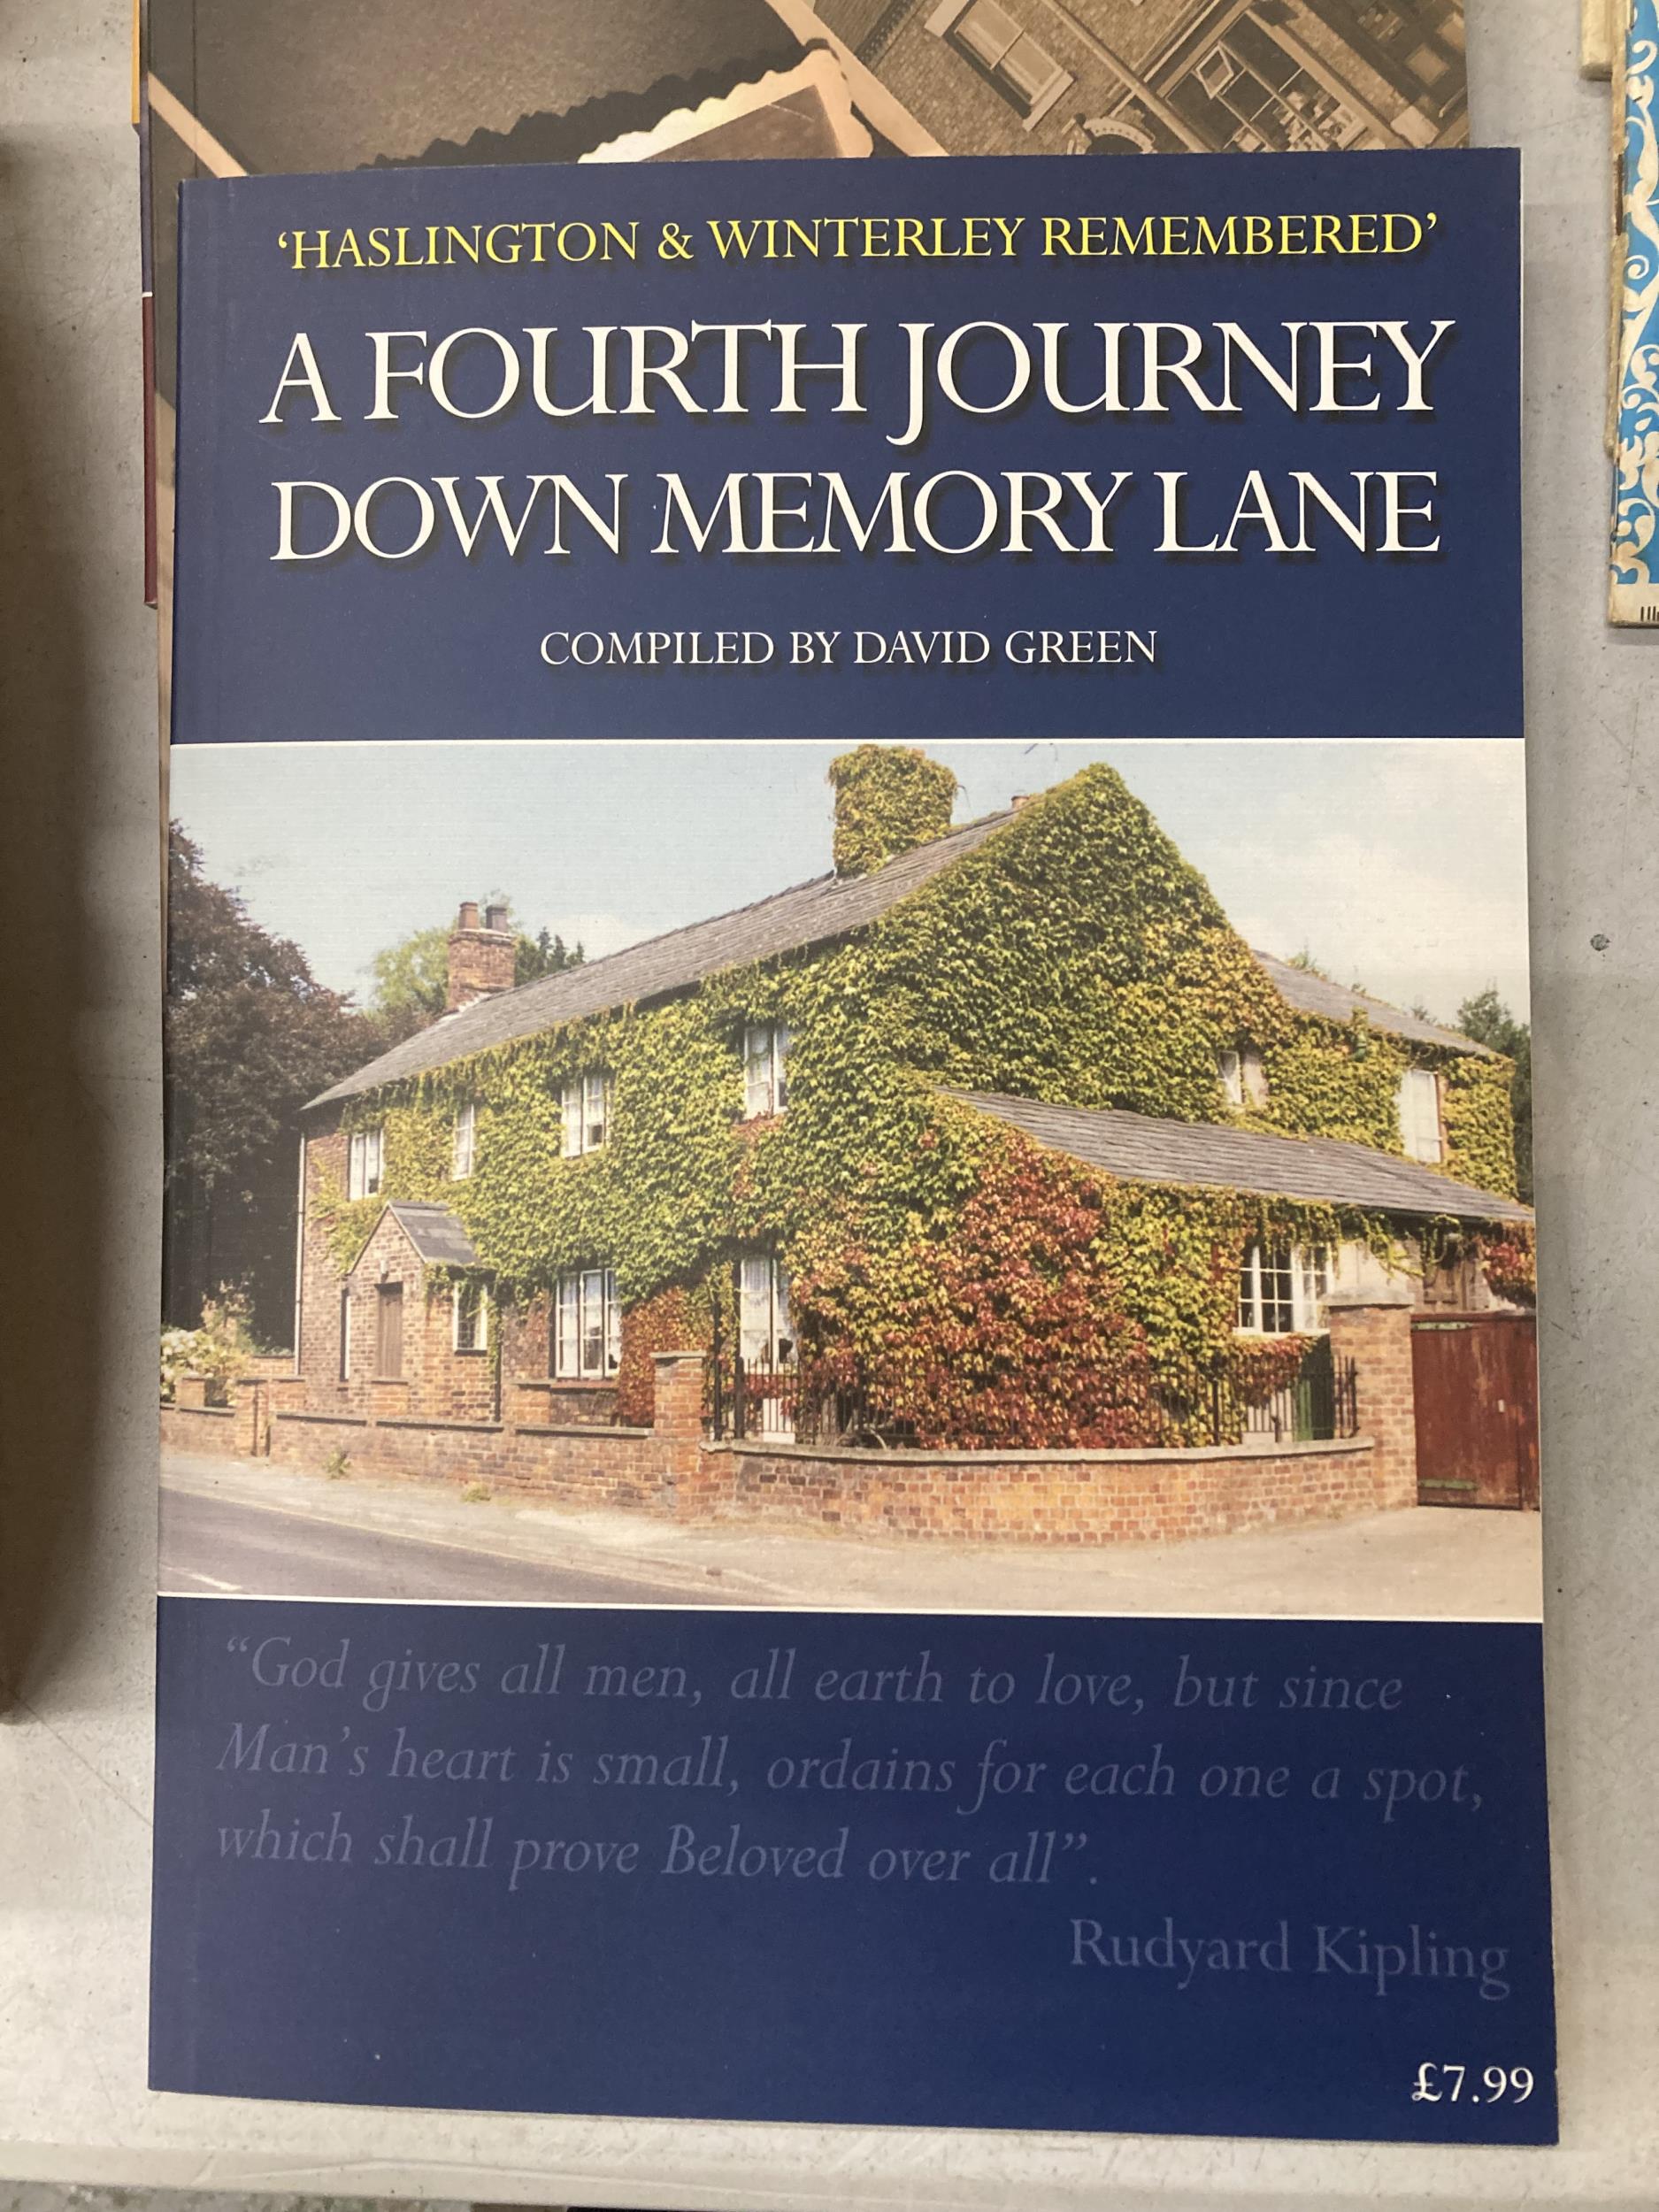 FIVE VOLUMES OF HASLINGTON & WINTERLEY REMEMBERED - A JOURNEY DOWN MEMORY LANE COMPILED BY DAVID - Bild 4 aus 4